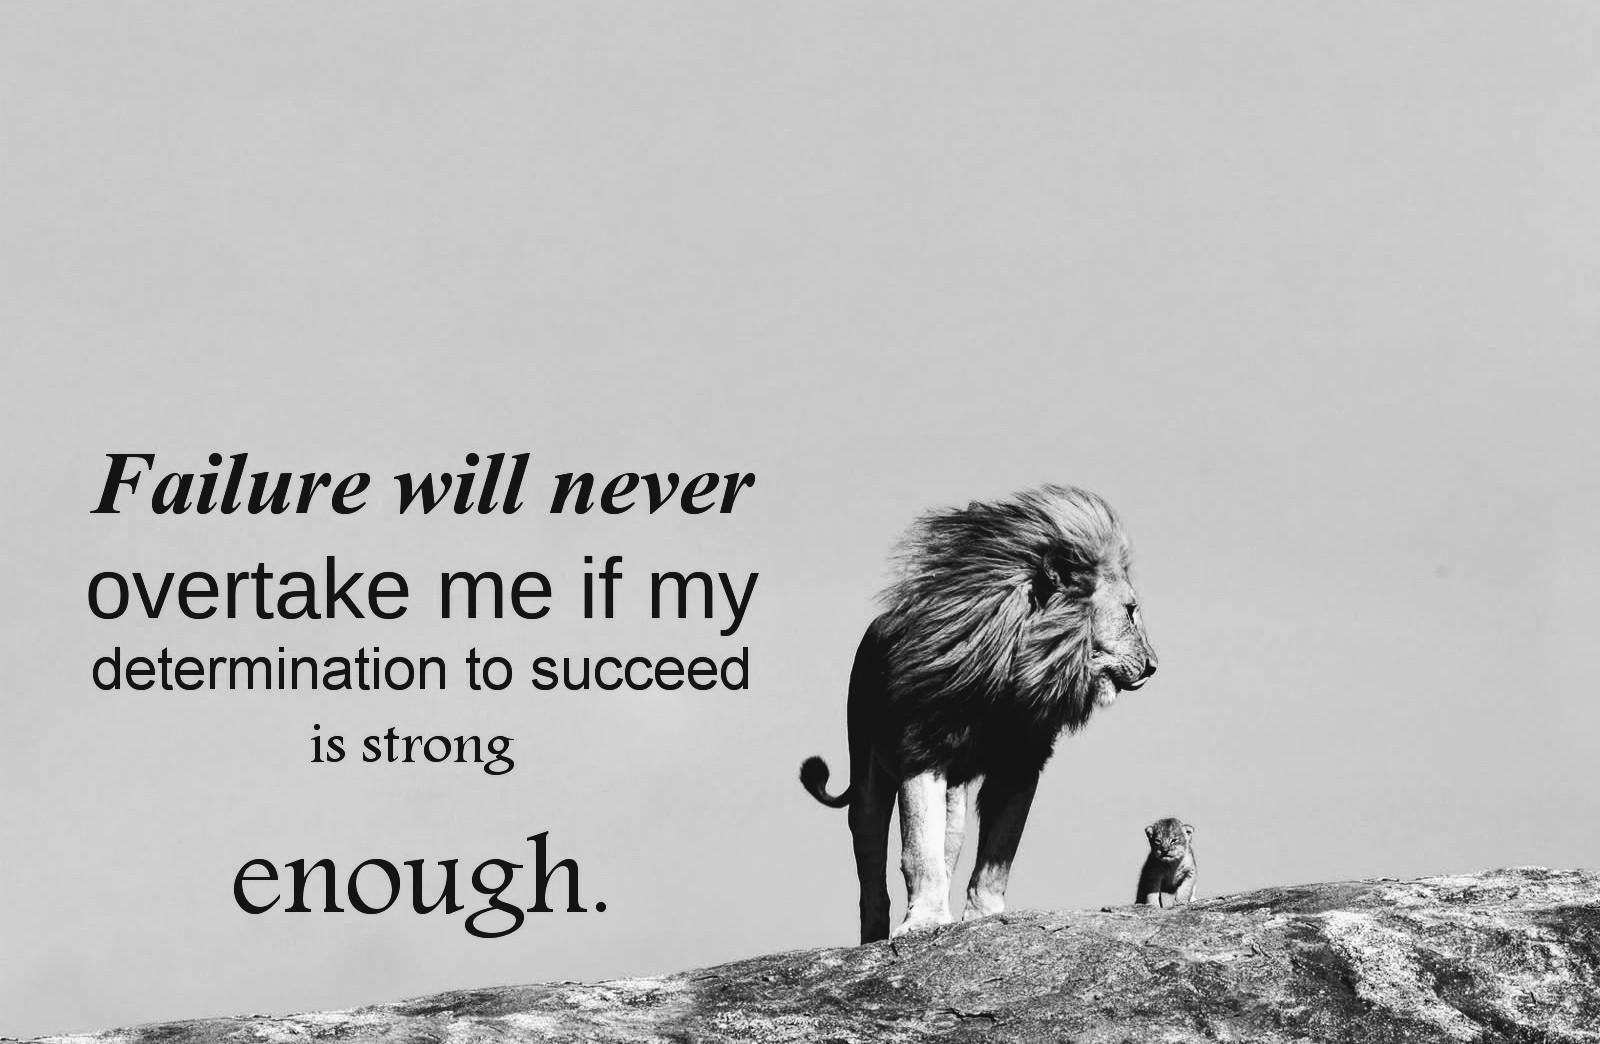 Failure will never overtake me as long as my determination to succeed is strong enough